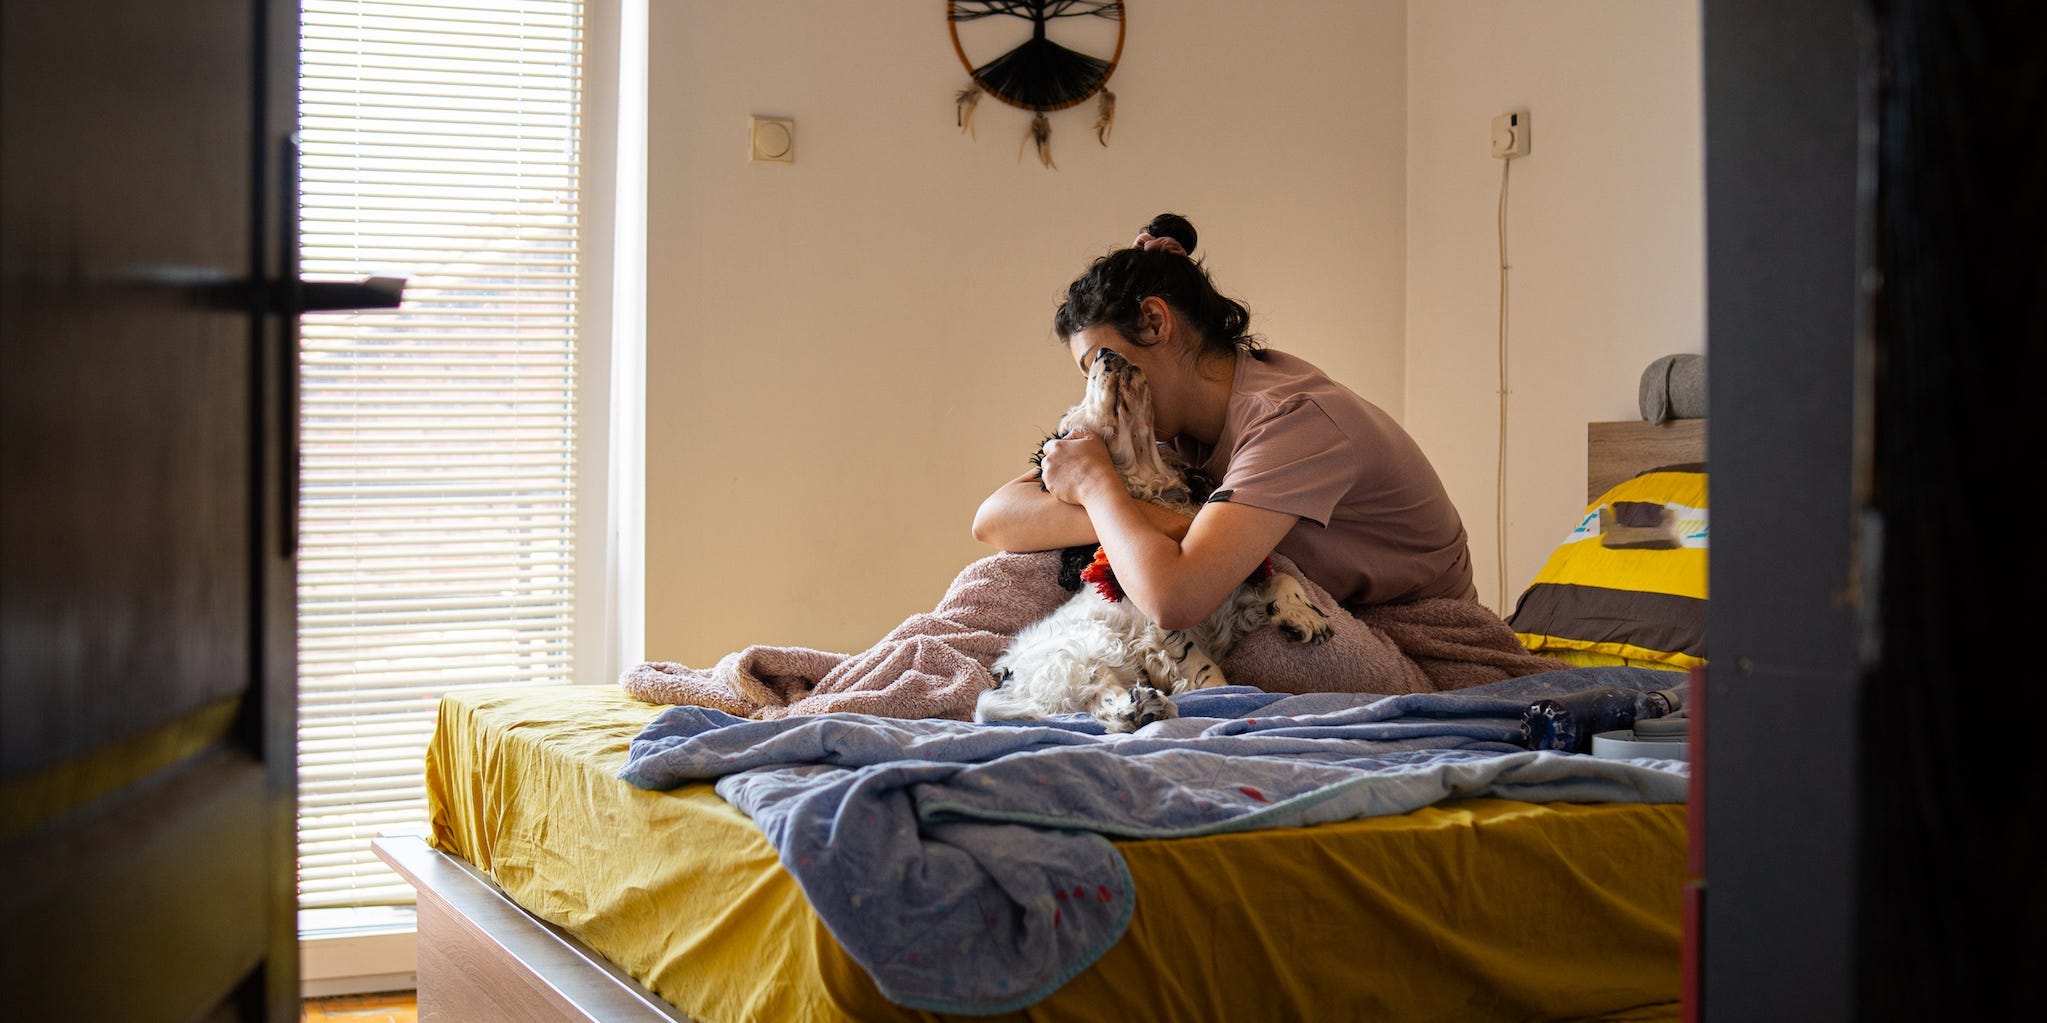 A woman cuddles with her dog on a bed.